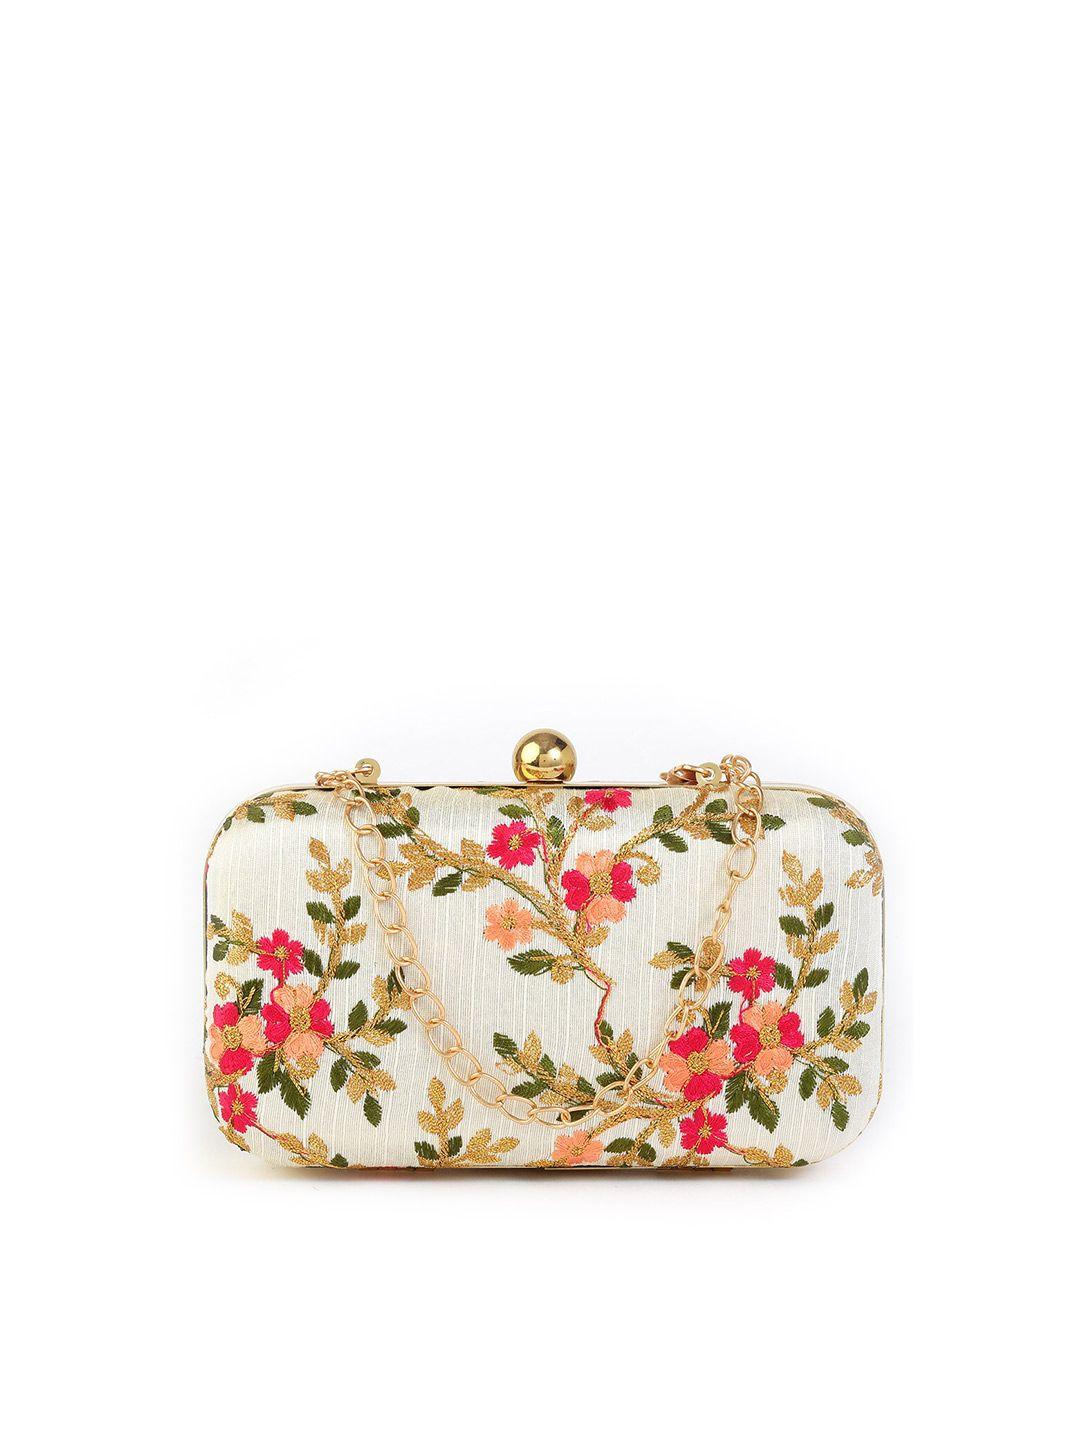 gaura pakhi gold-toned & white embroidered box clutch